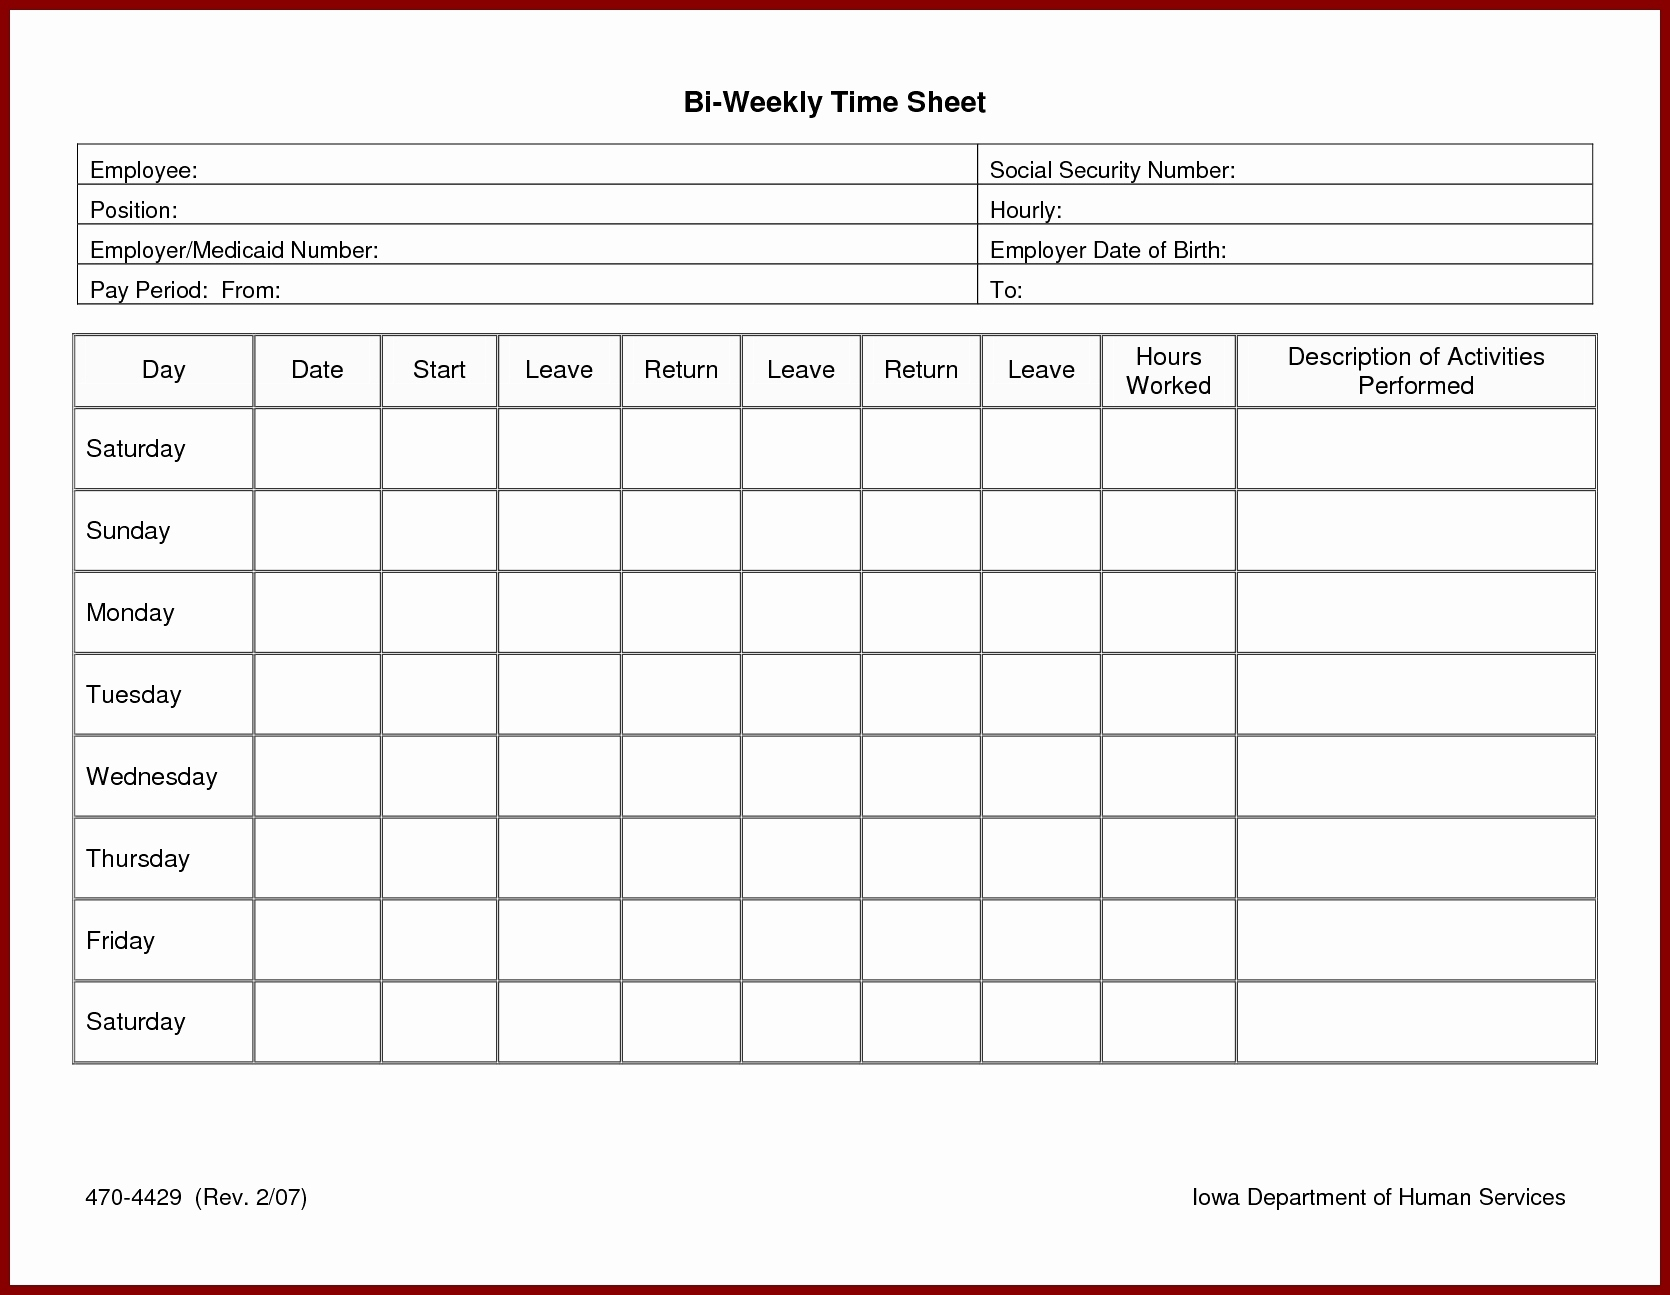 Comp Time Tracking Spreadsheet Throughout Sheet Employee Training Tracker Excel New Vacation Time Tracking